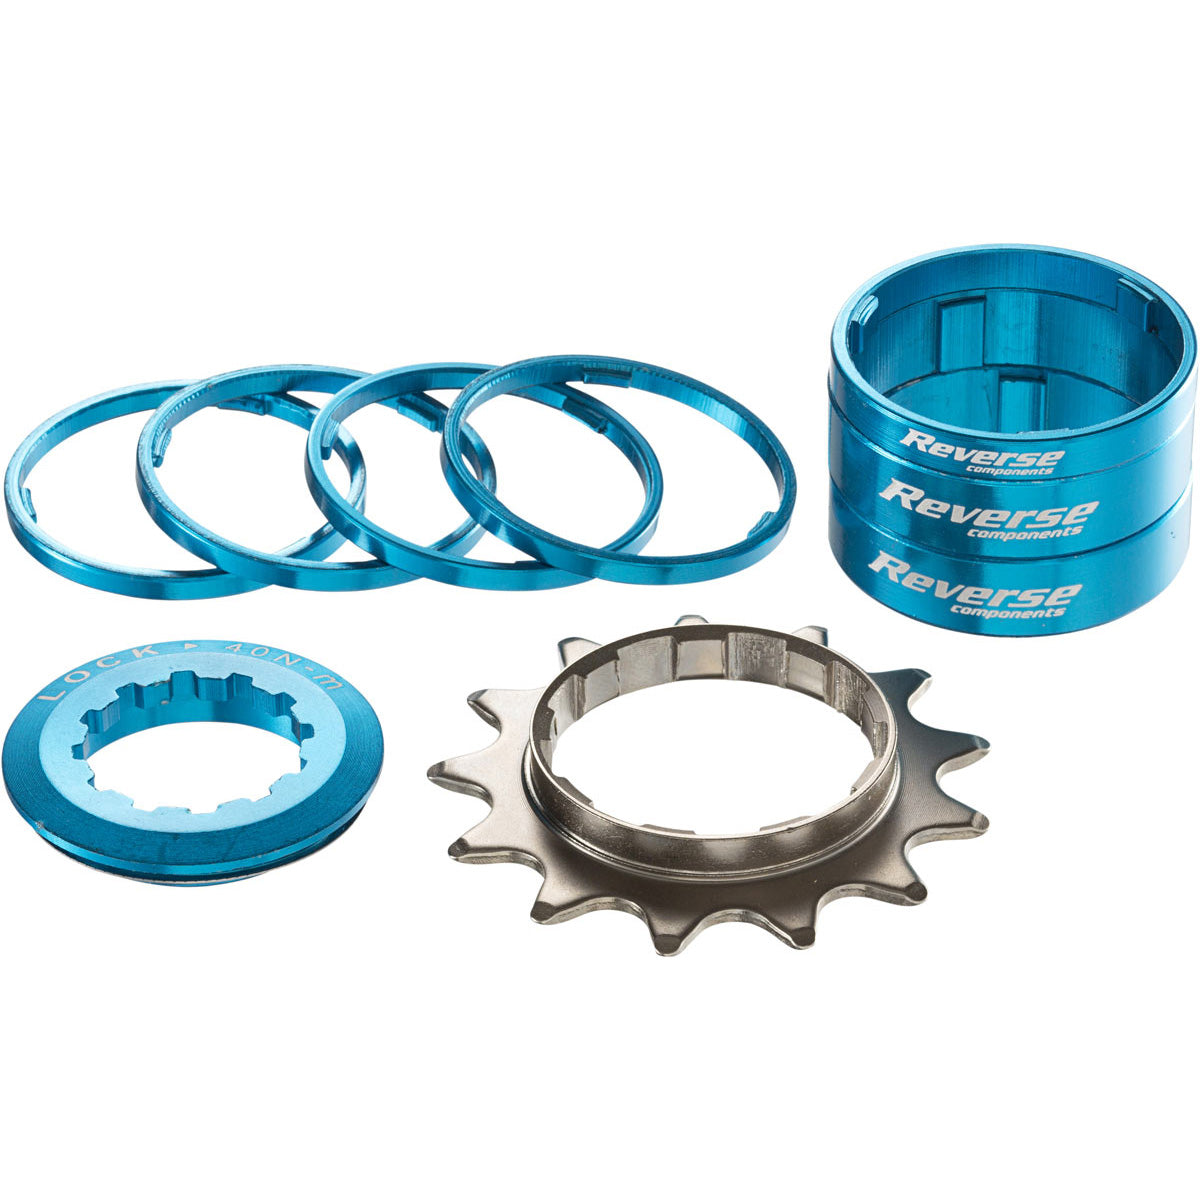 Reverse Single Speed Spacer Kit – Reverse Components USA